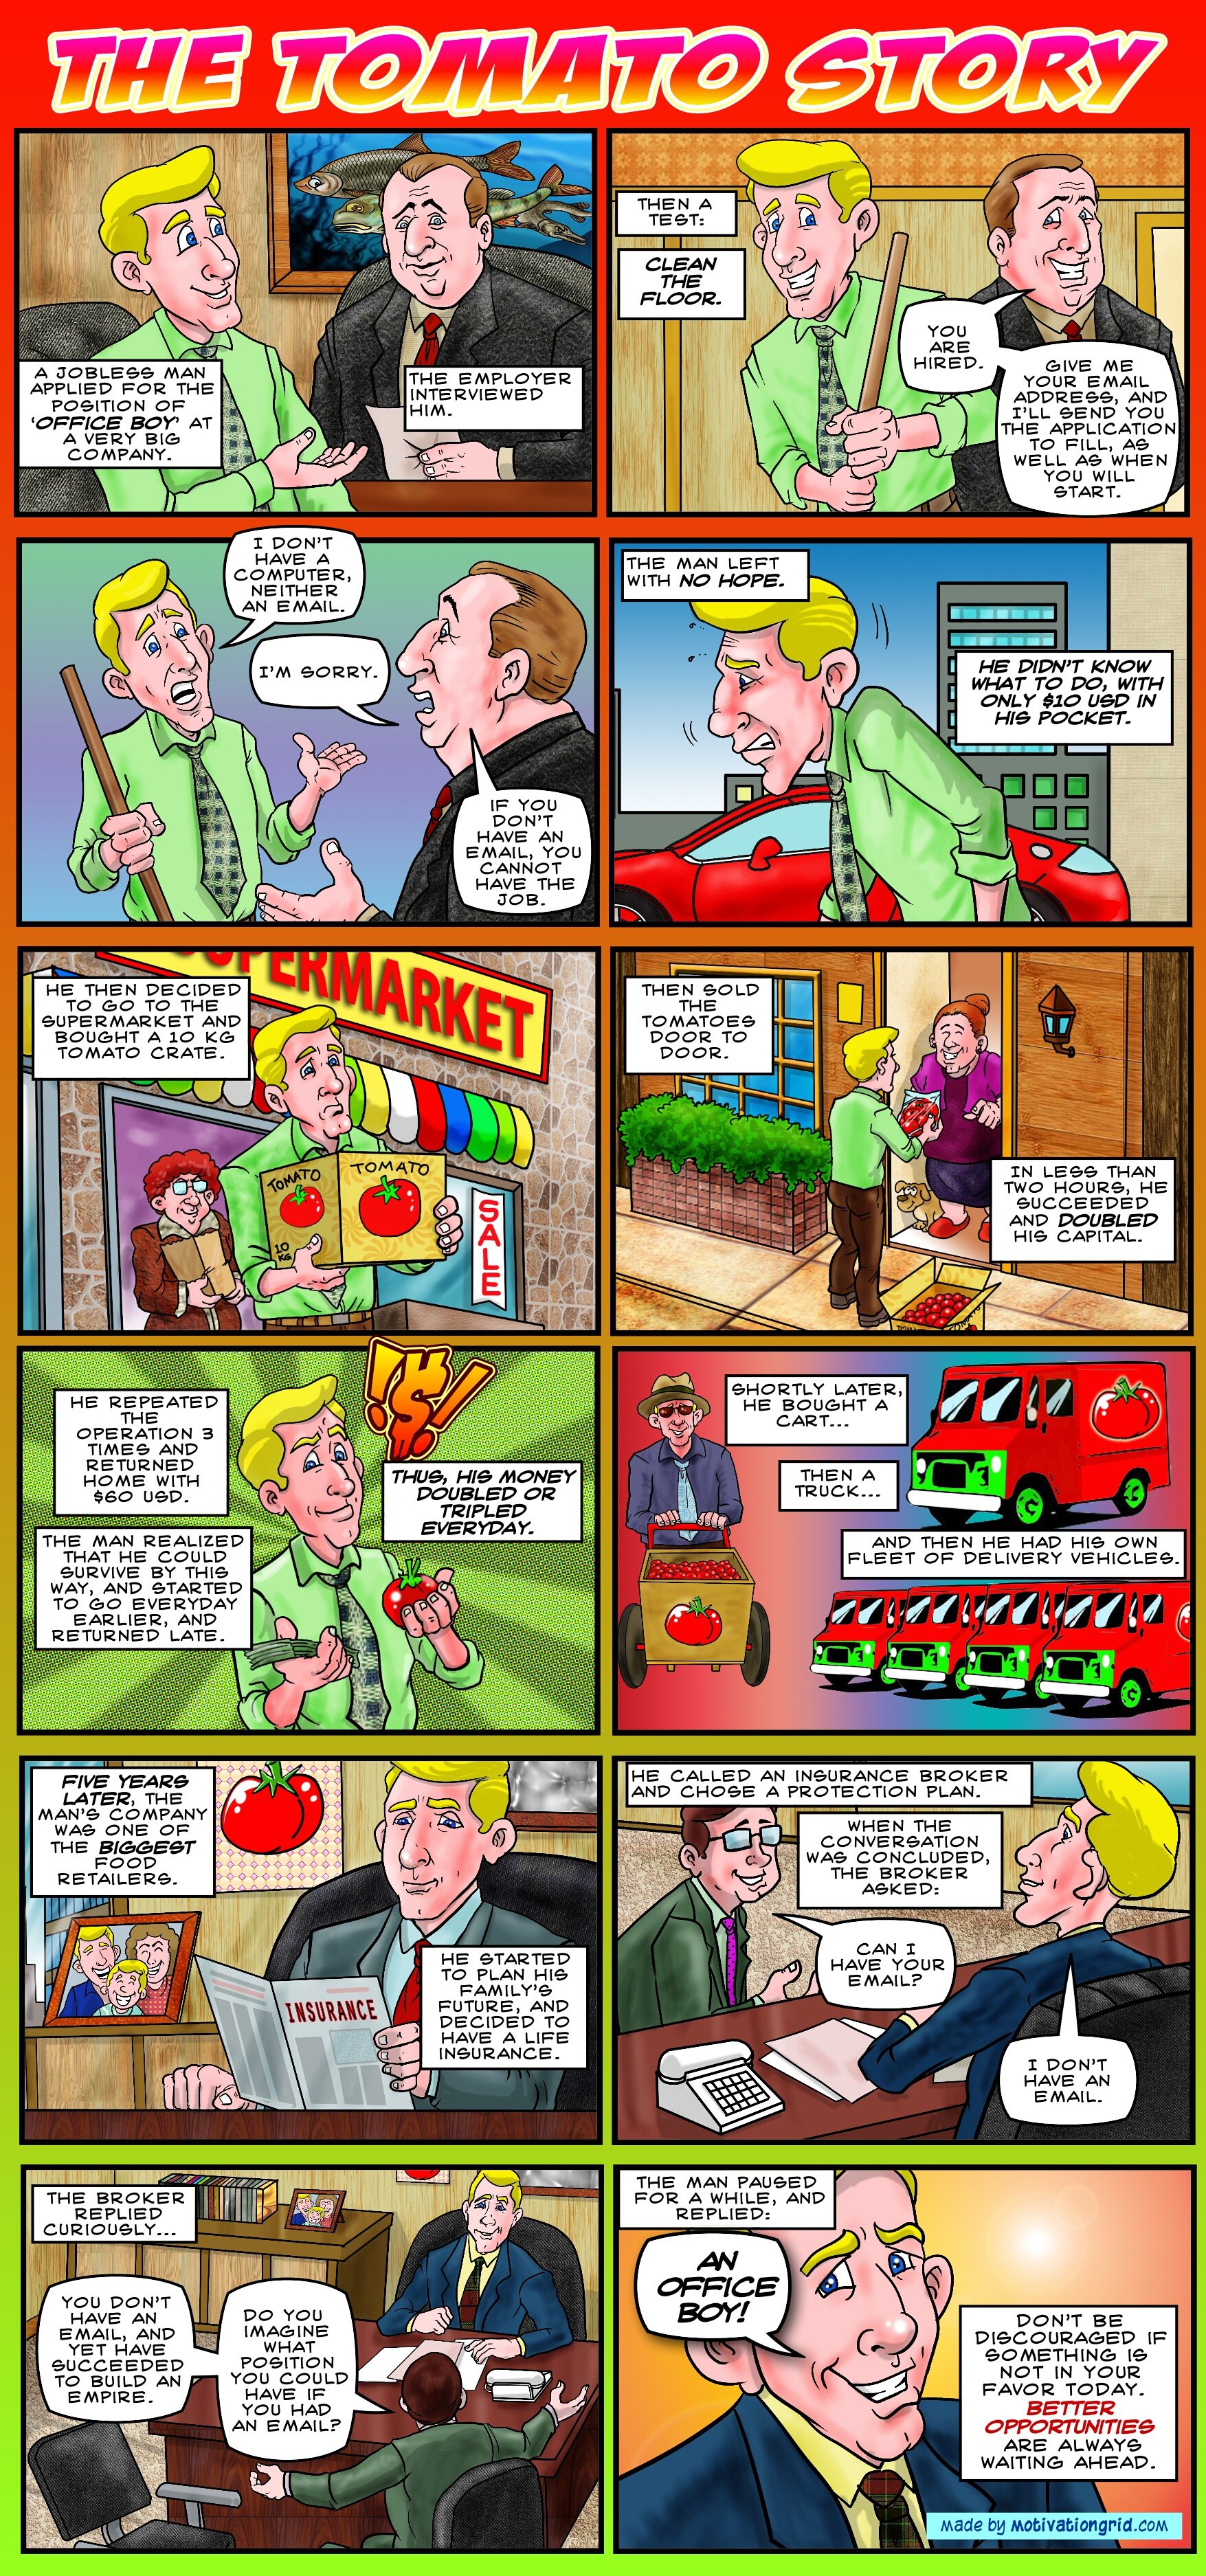 Short comic strip that will teach you a valuable lesson about missed opportunities, the tomato story, entrepreneur short story, don't get discouraged, comic